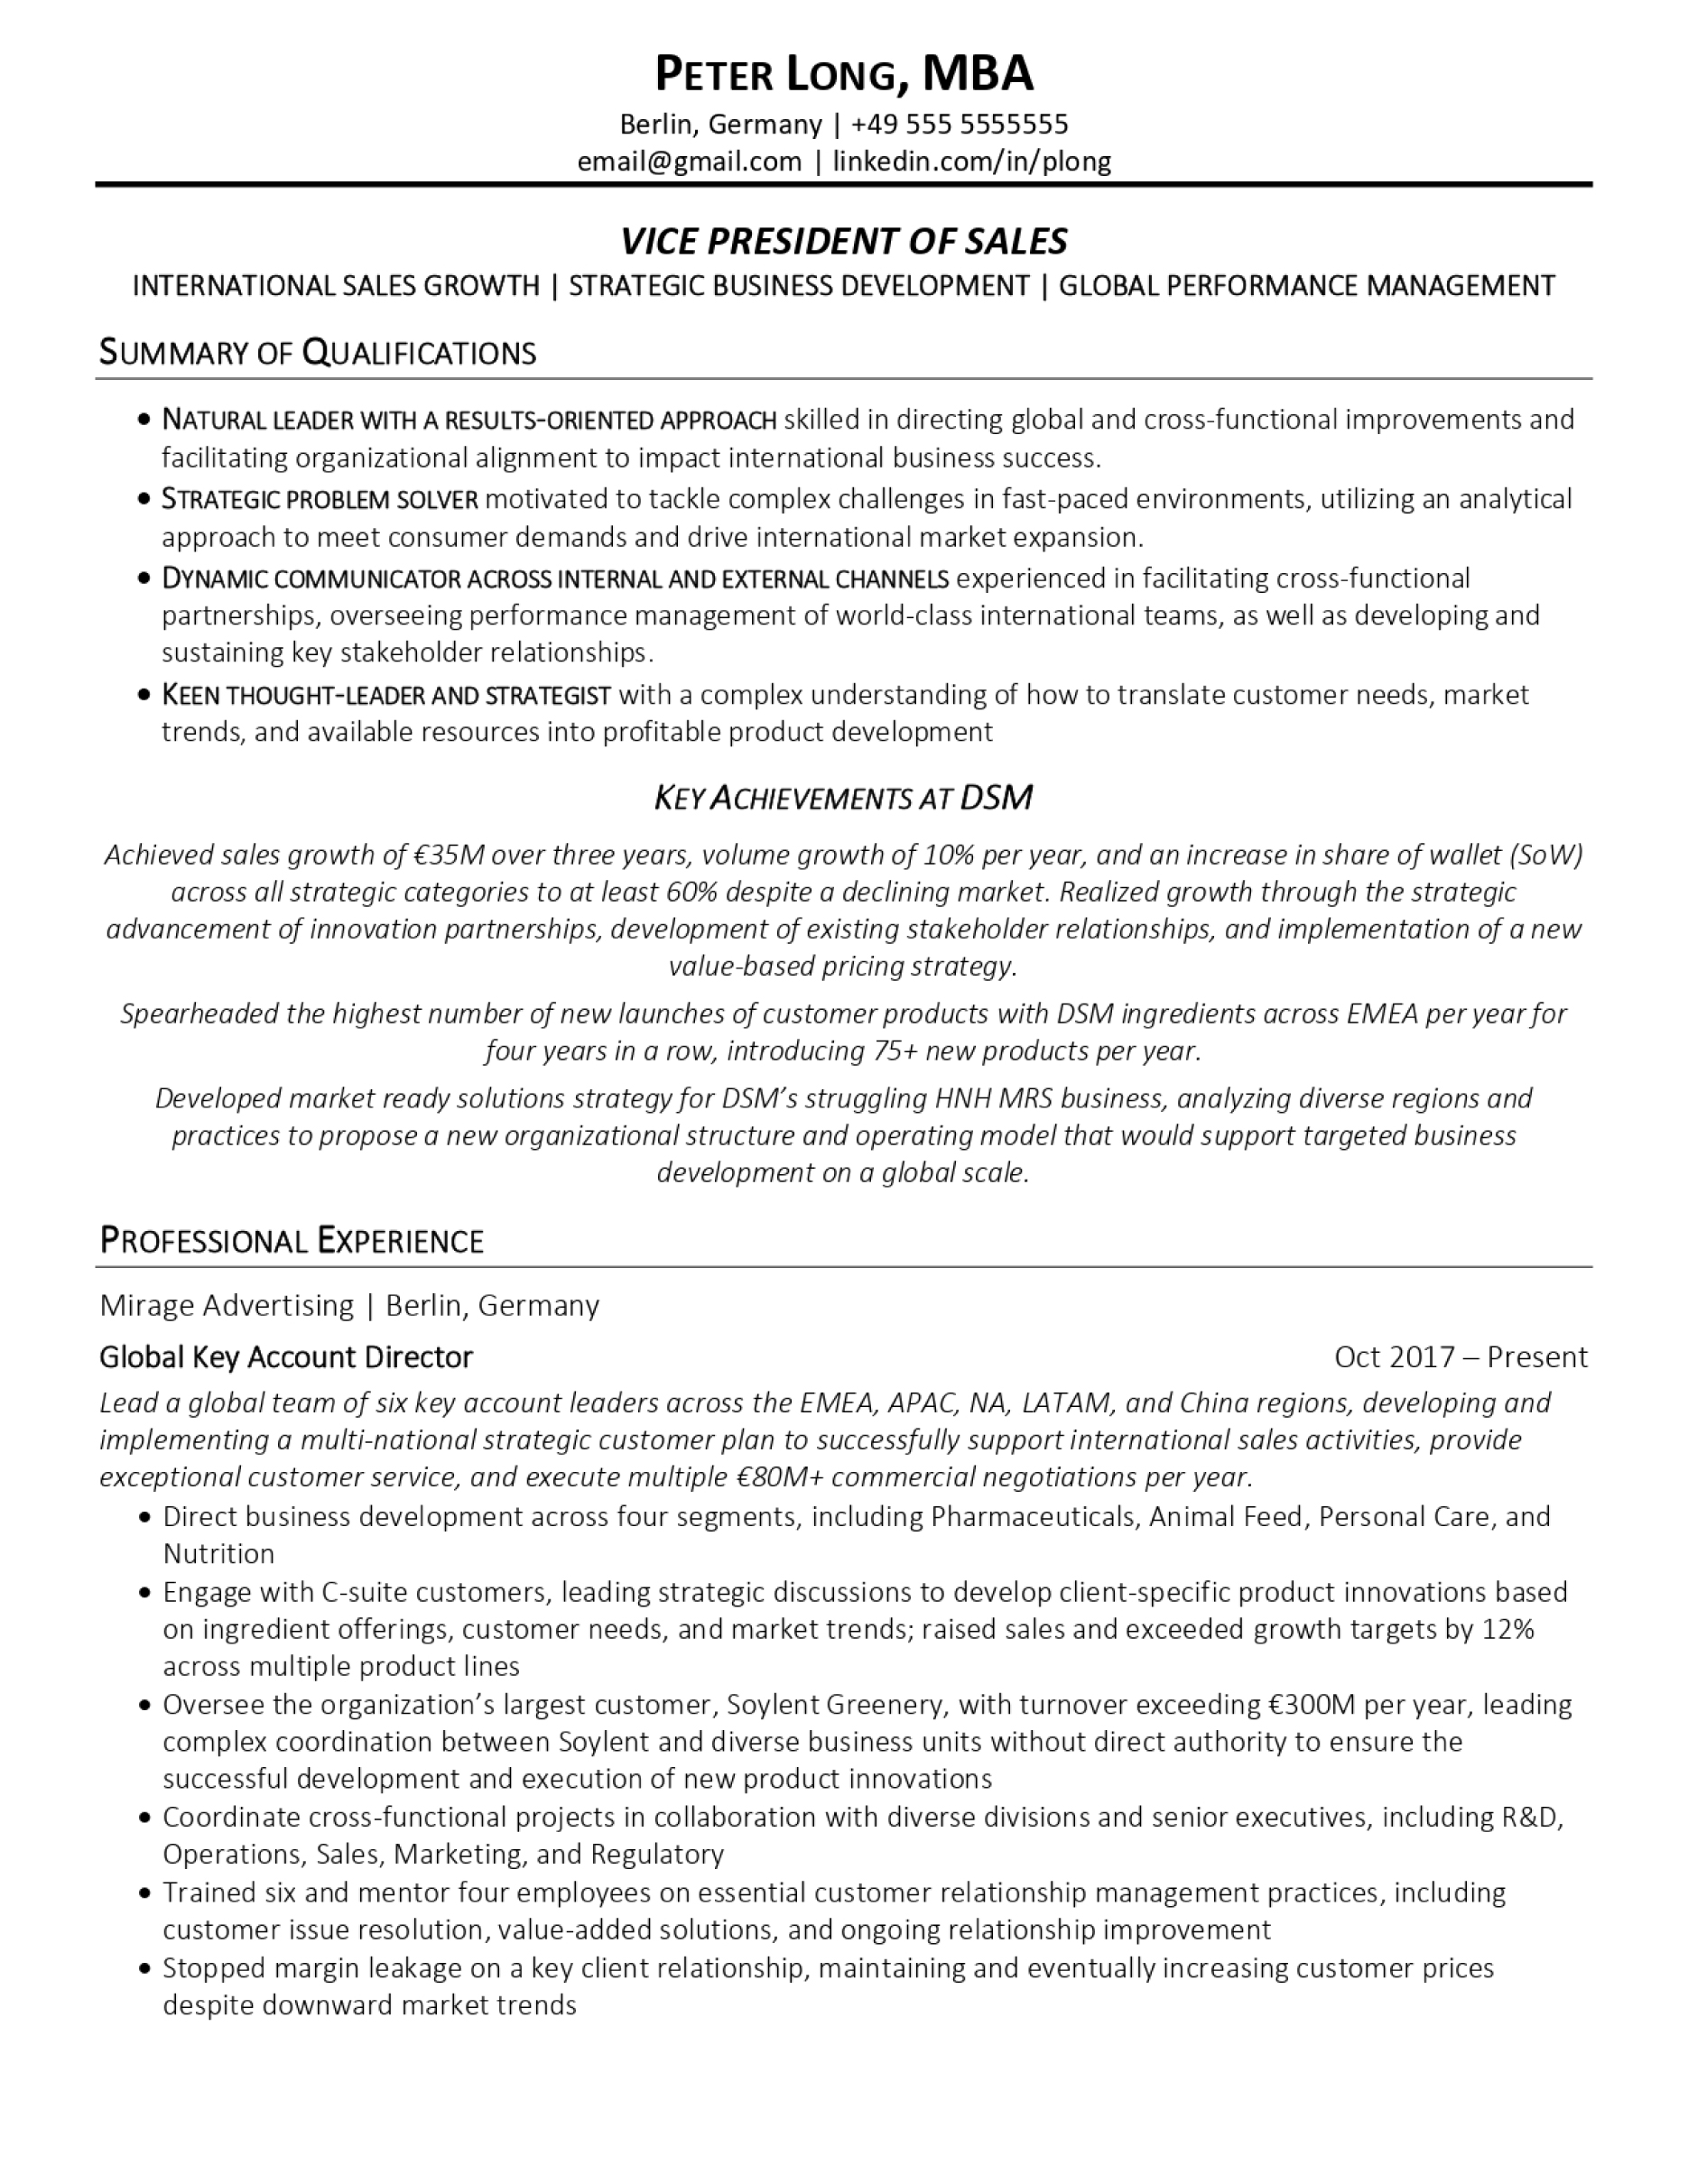 Page 1 of a sample Physical Security resume from Let's Eat, Grandma, the Best Resume Writing Service of 2022